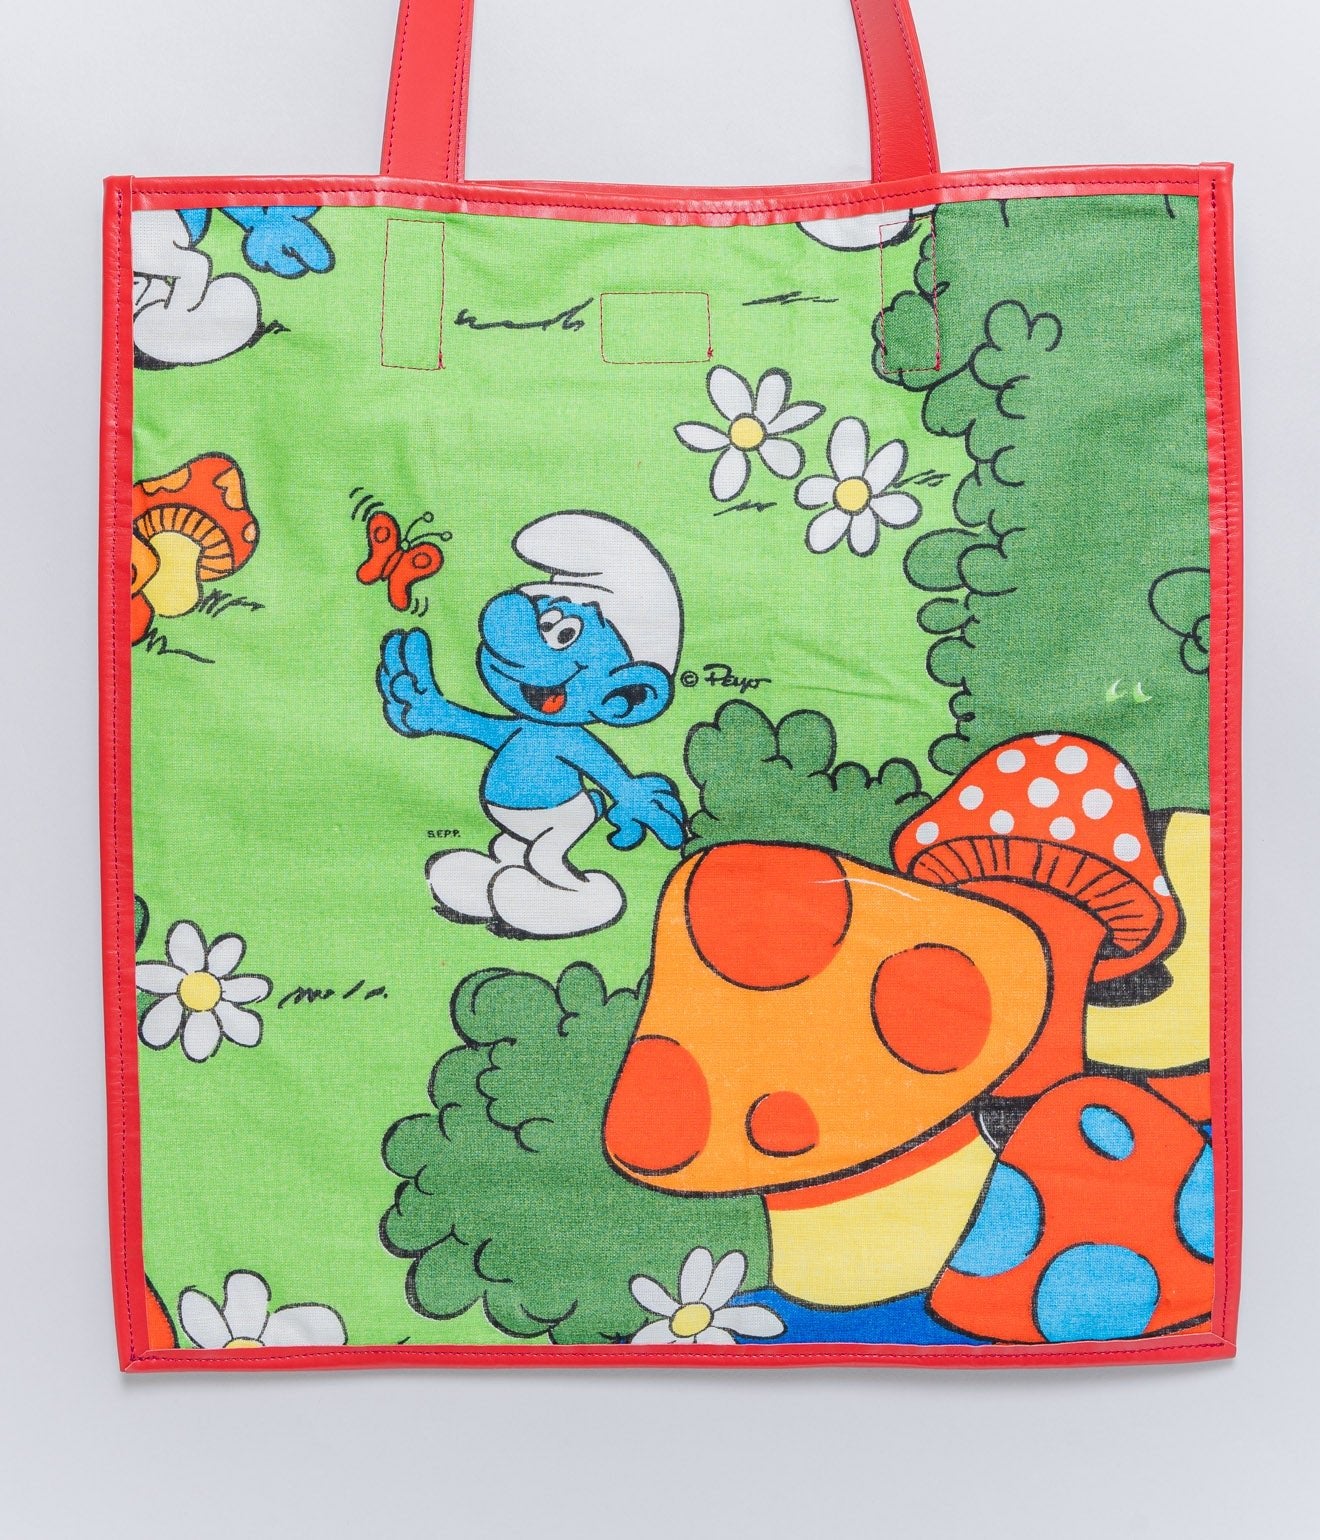 WEAREALLANIMALS UPCYCLE ”Piping Flat Tote -Vintage Smurf Fabric-" #9 - WEAREALLANIMALS